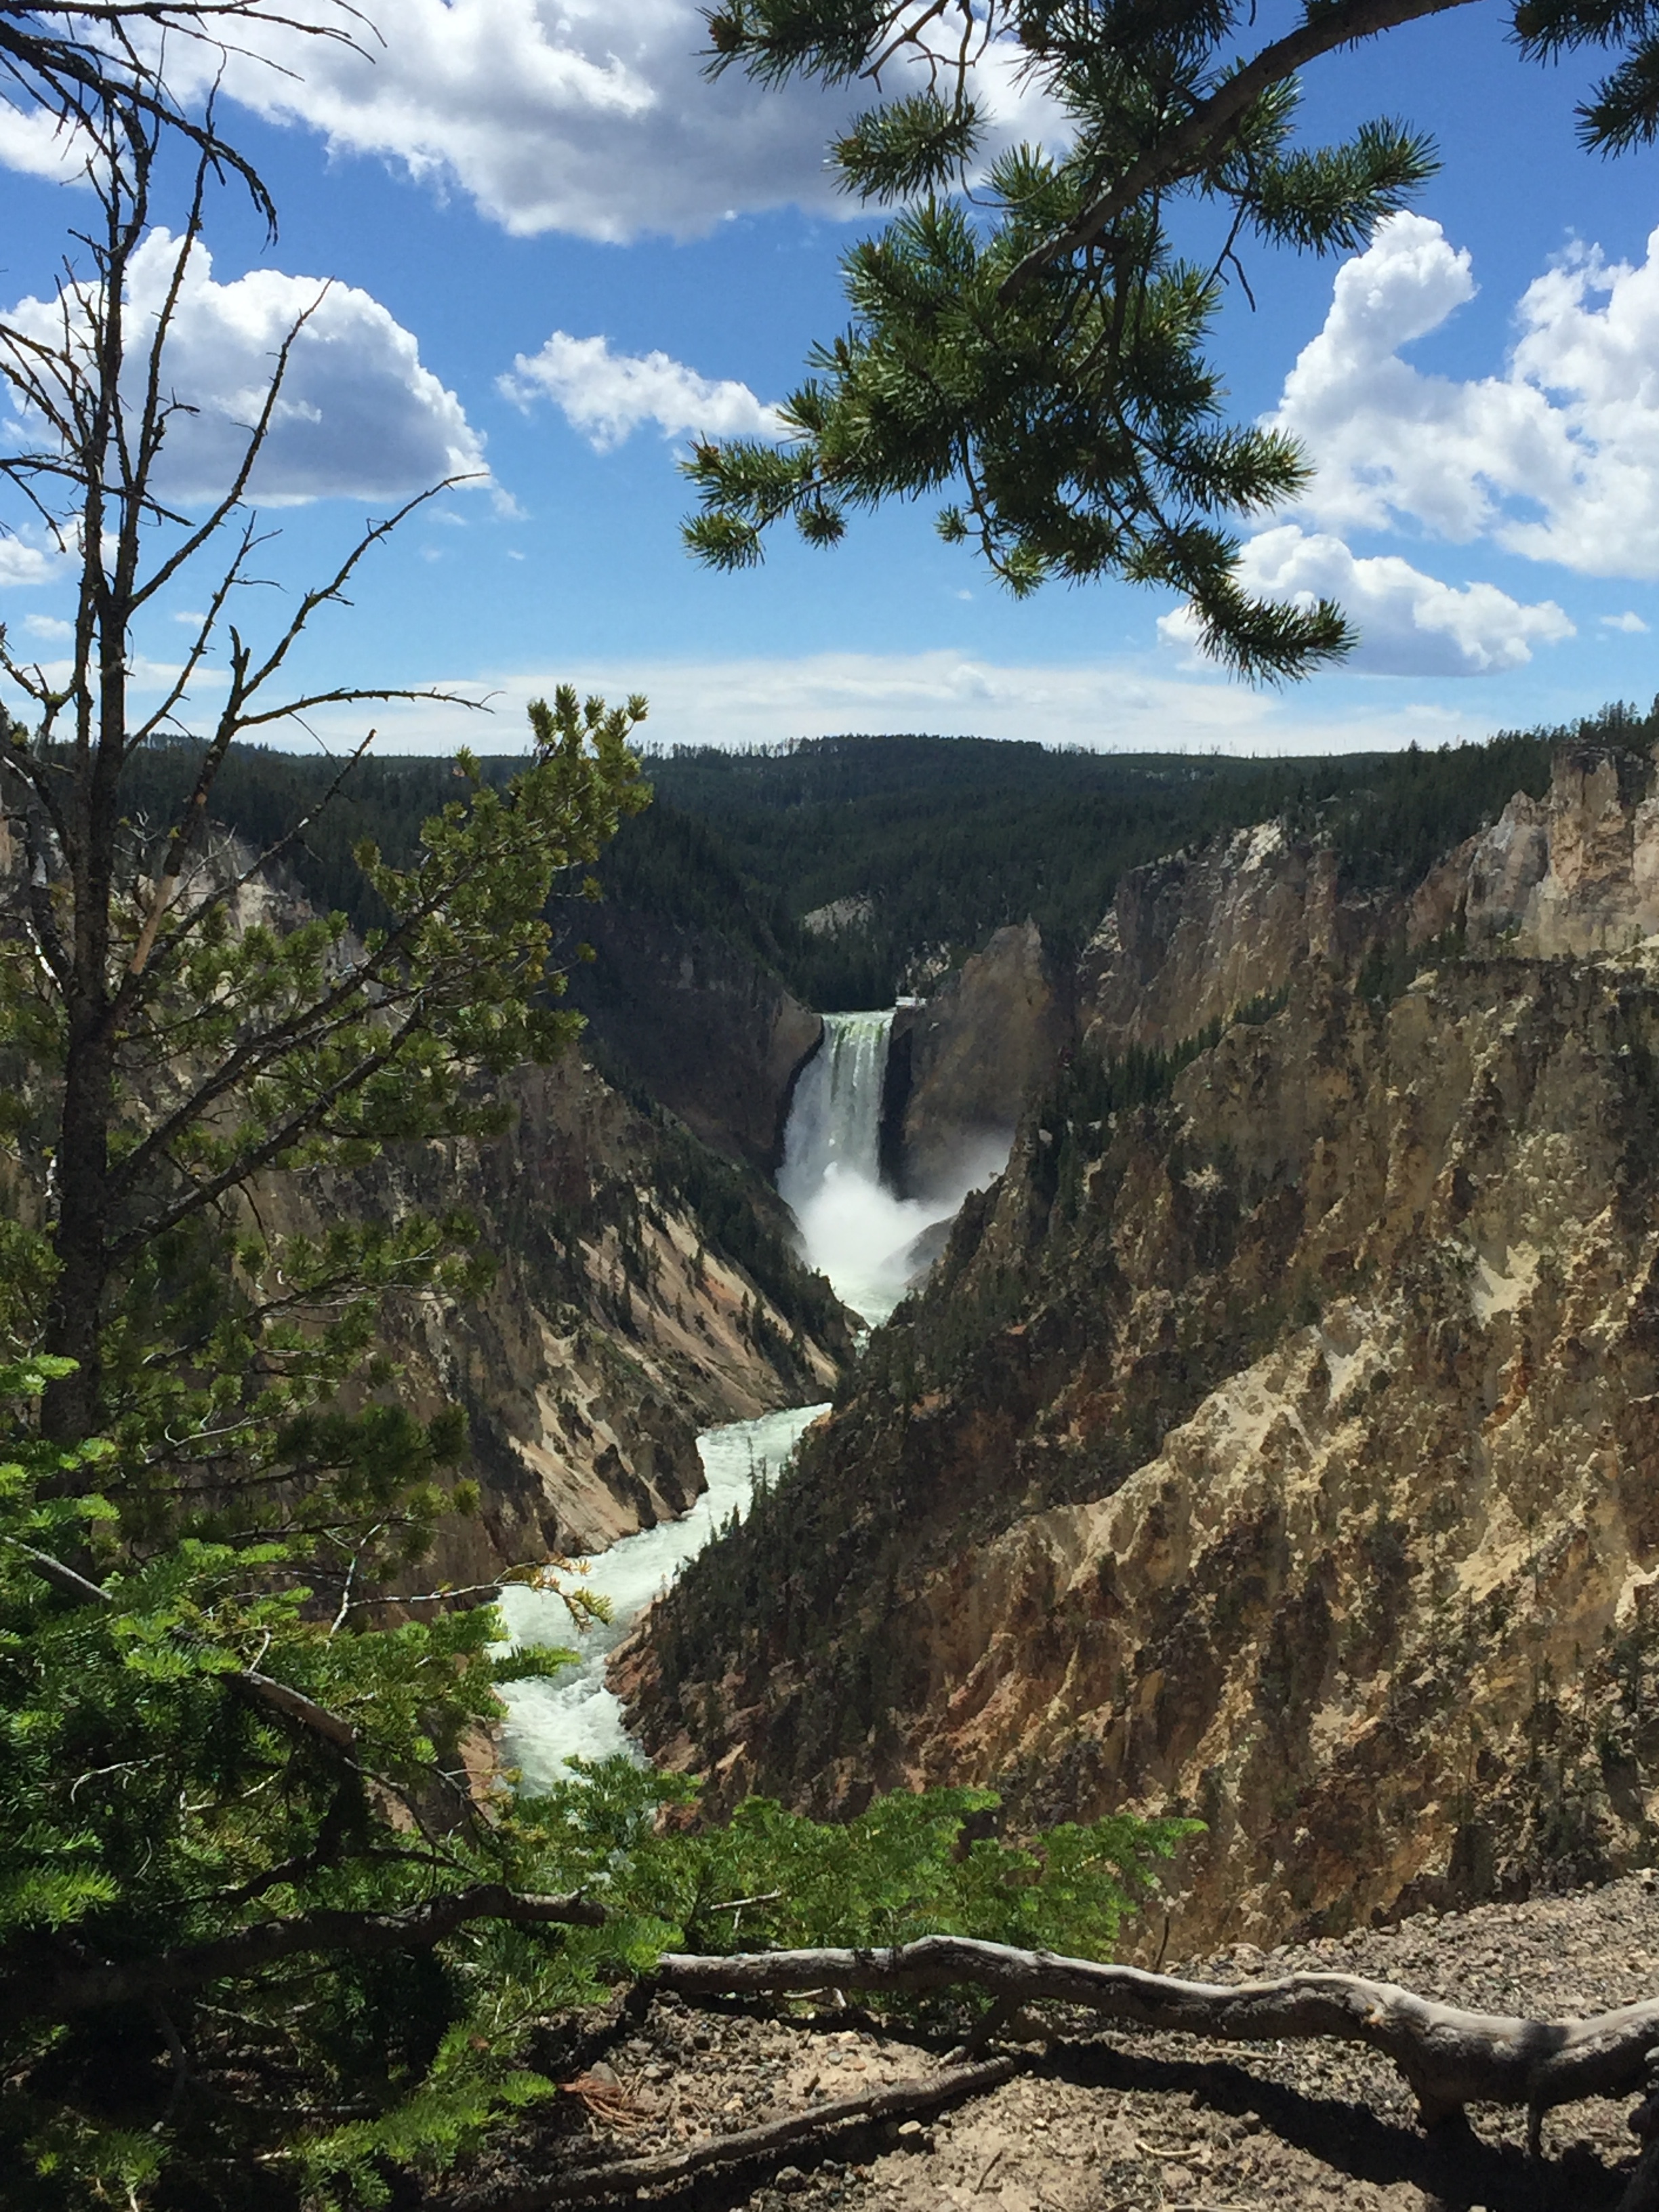  Lower Yellowstone Falls from Artist's Point.&nbsp; YNP 